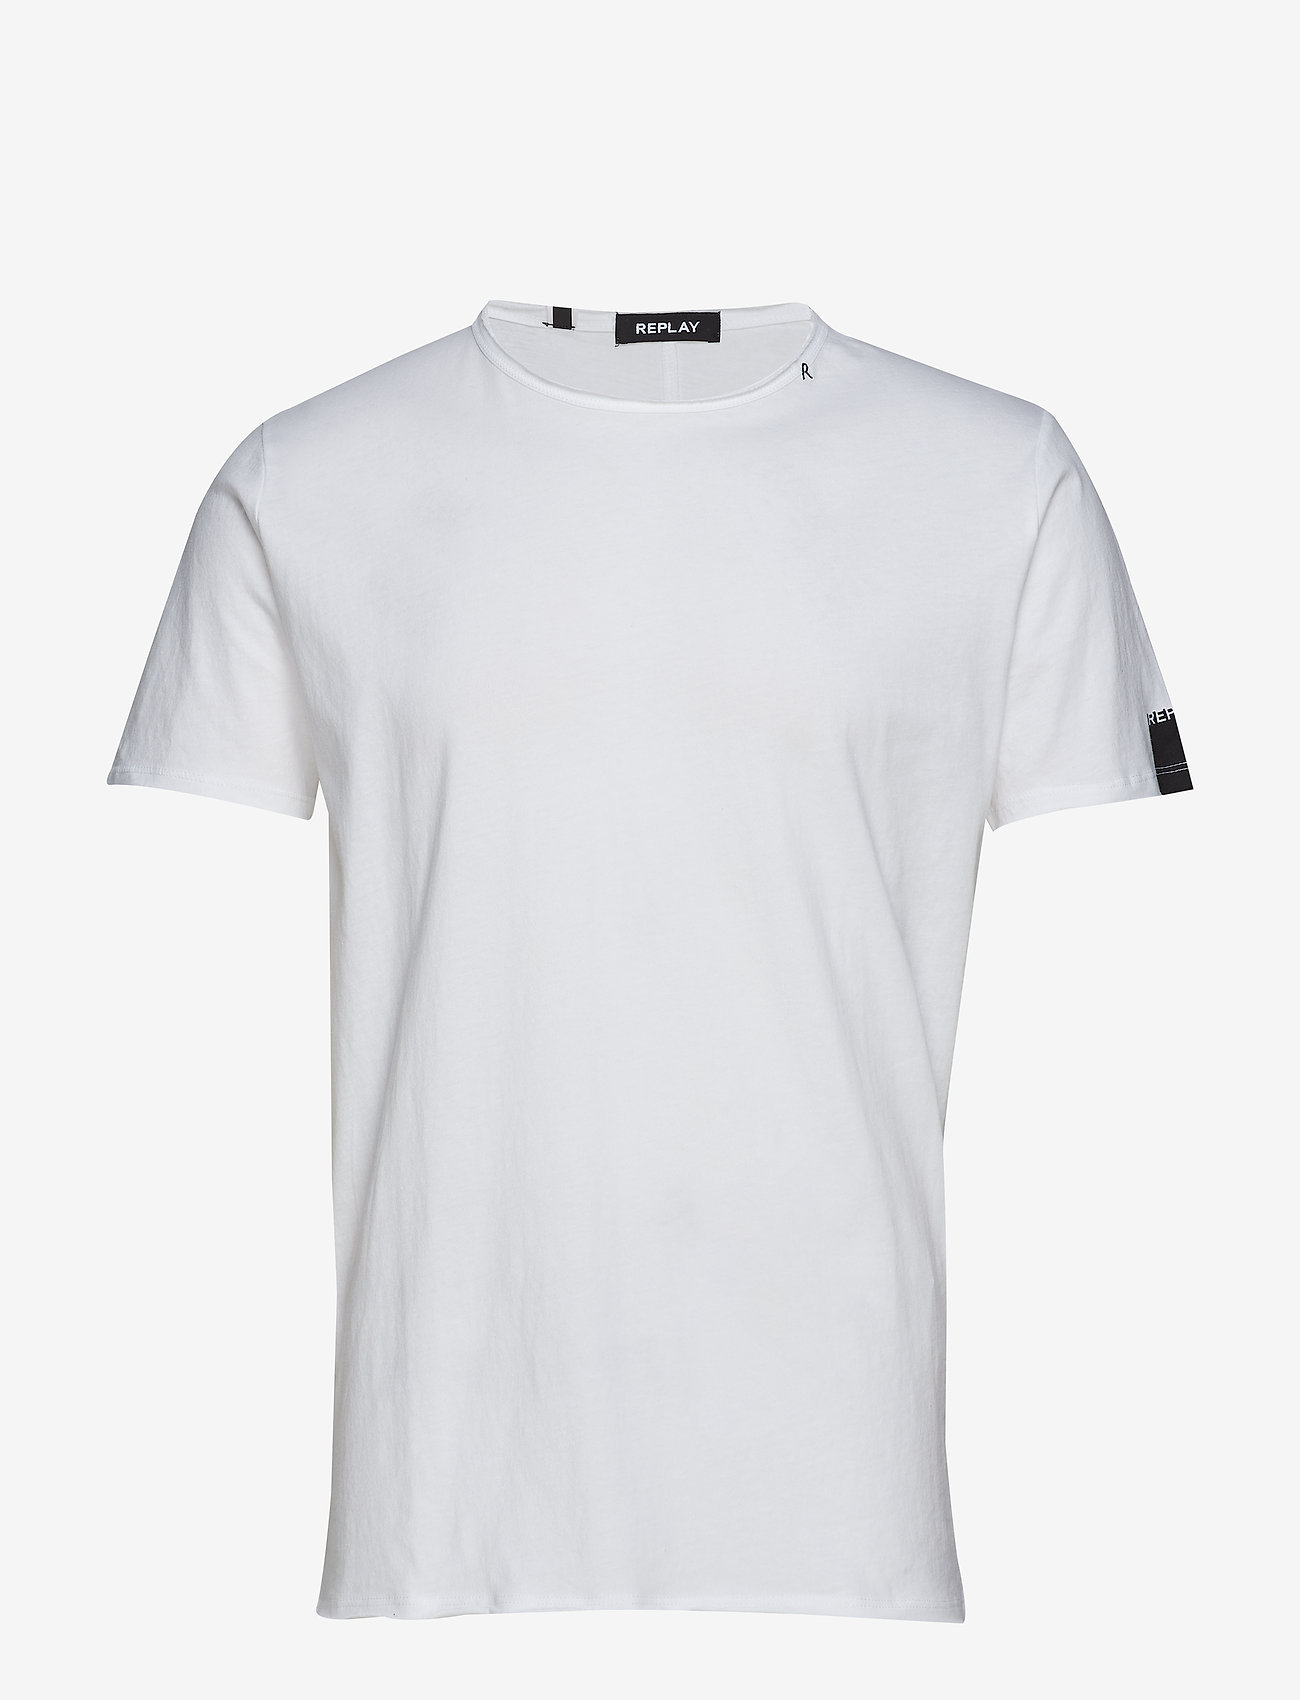 Replay - T-Shirt - lowest prices - white - 0